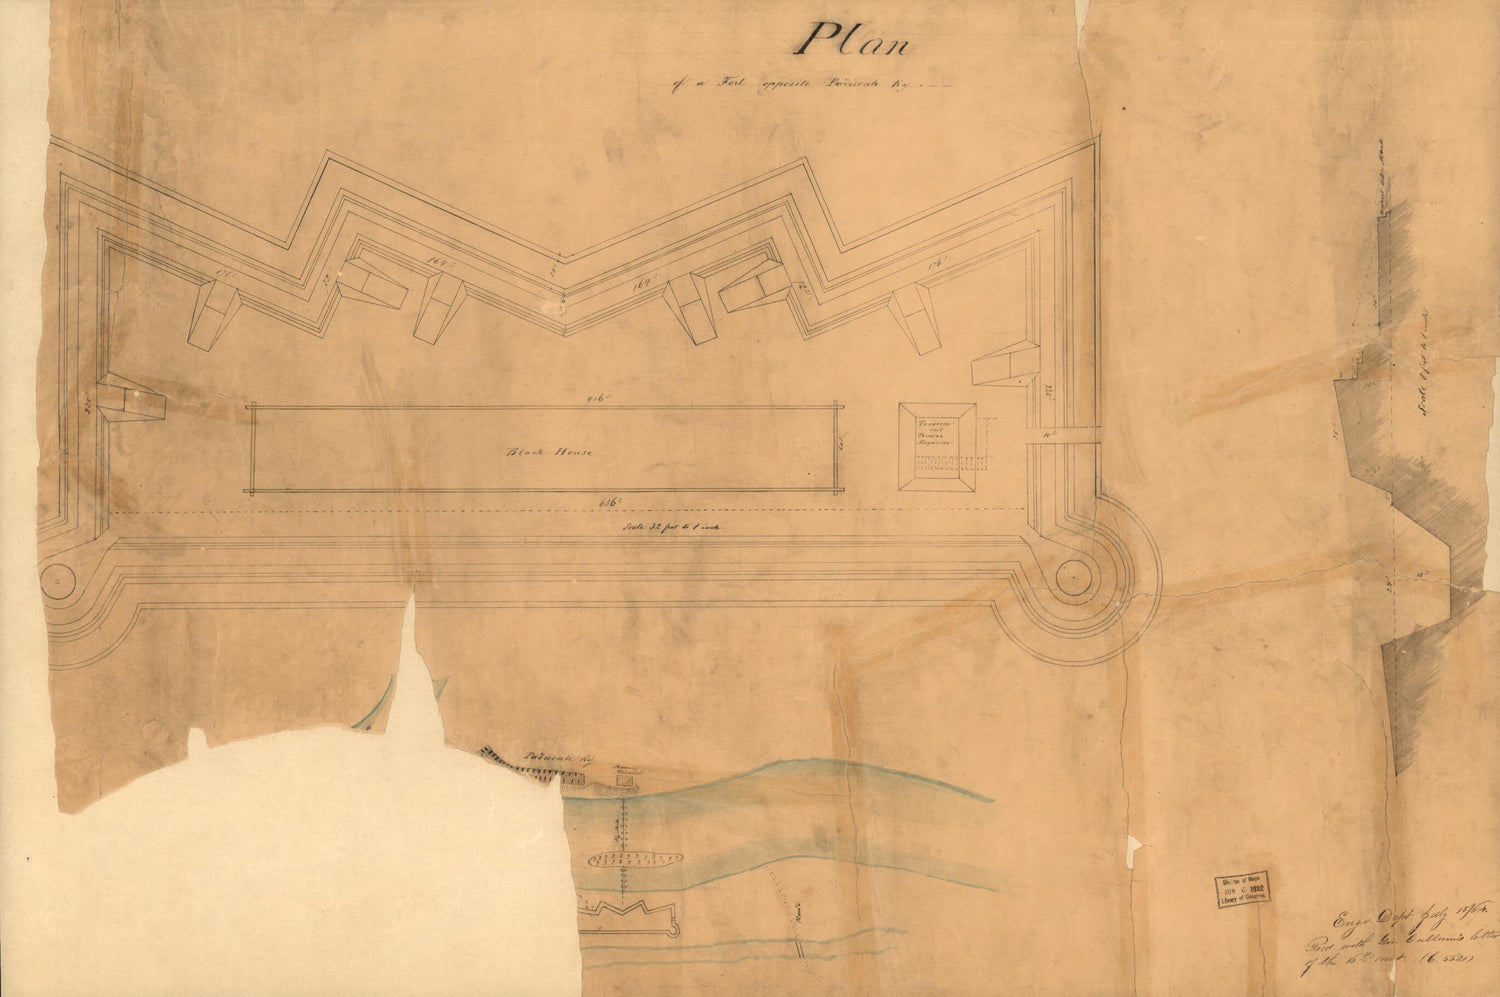 This old map of Plan of a Fort Opposite Paducah, Ky from 1864 was created by  in 1864